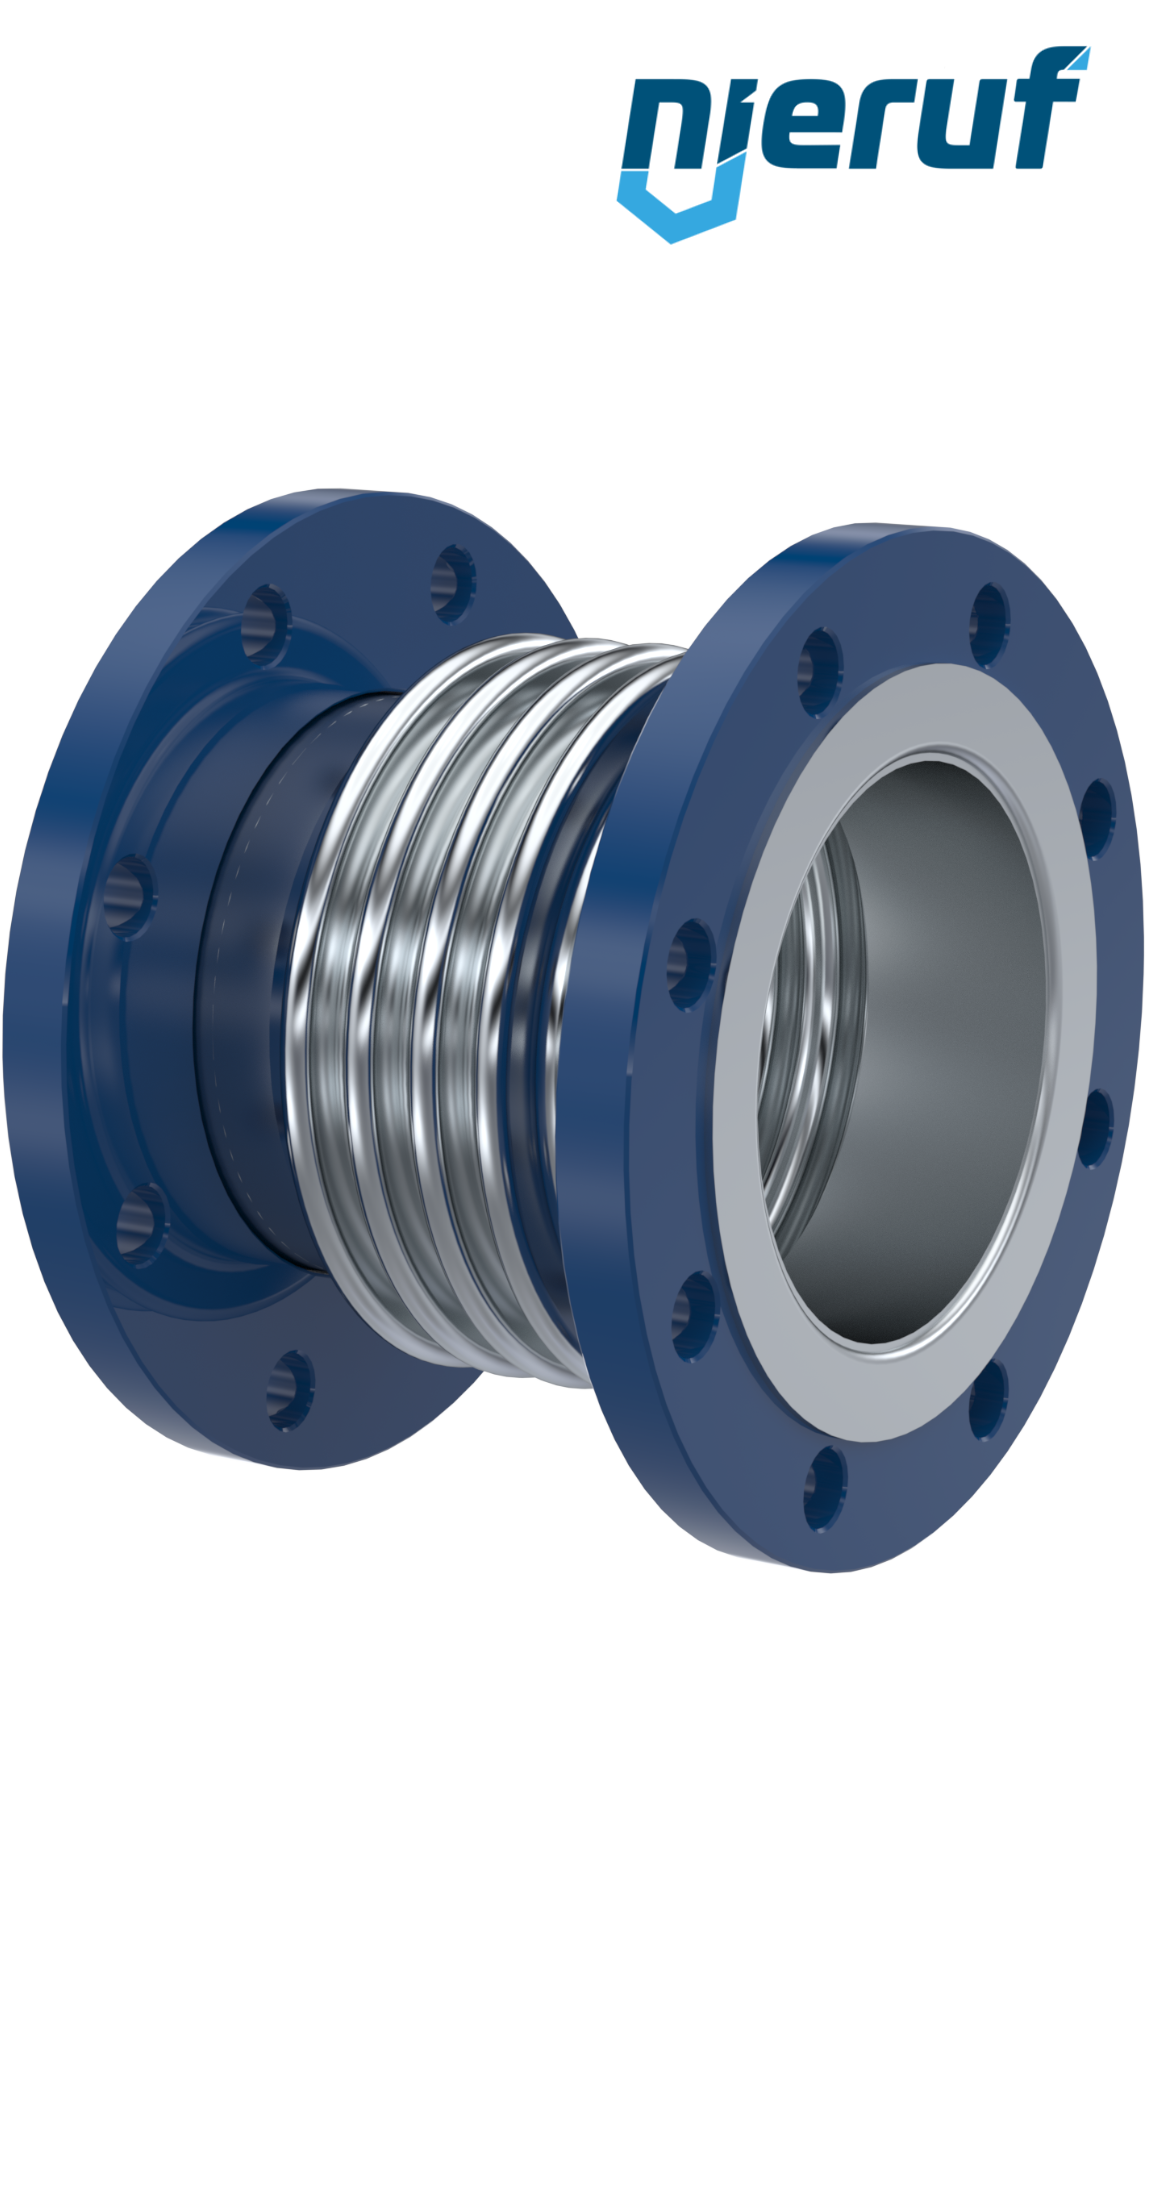 Axial expansion joint DN250 type KP05 flared flanges and stainless steel-bellows